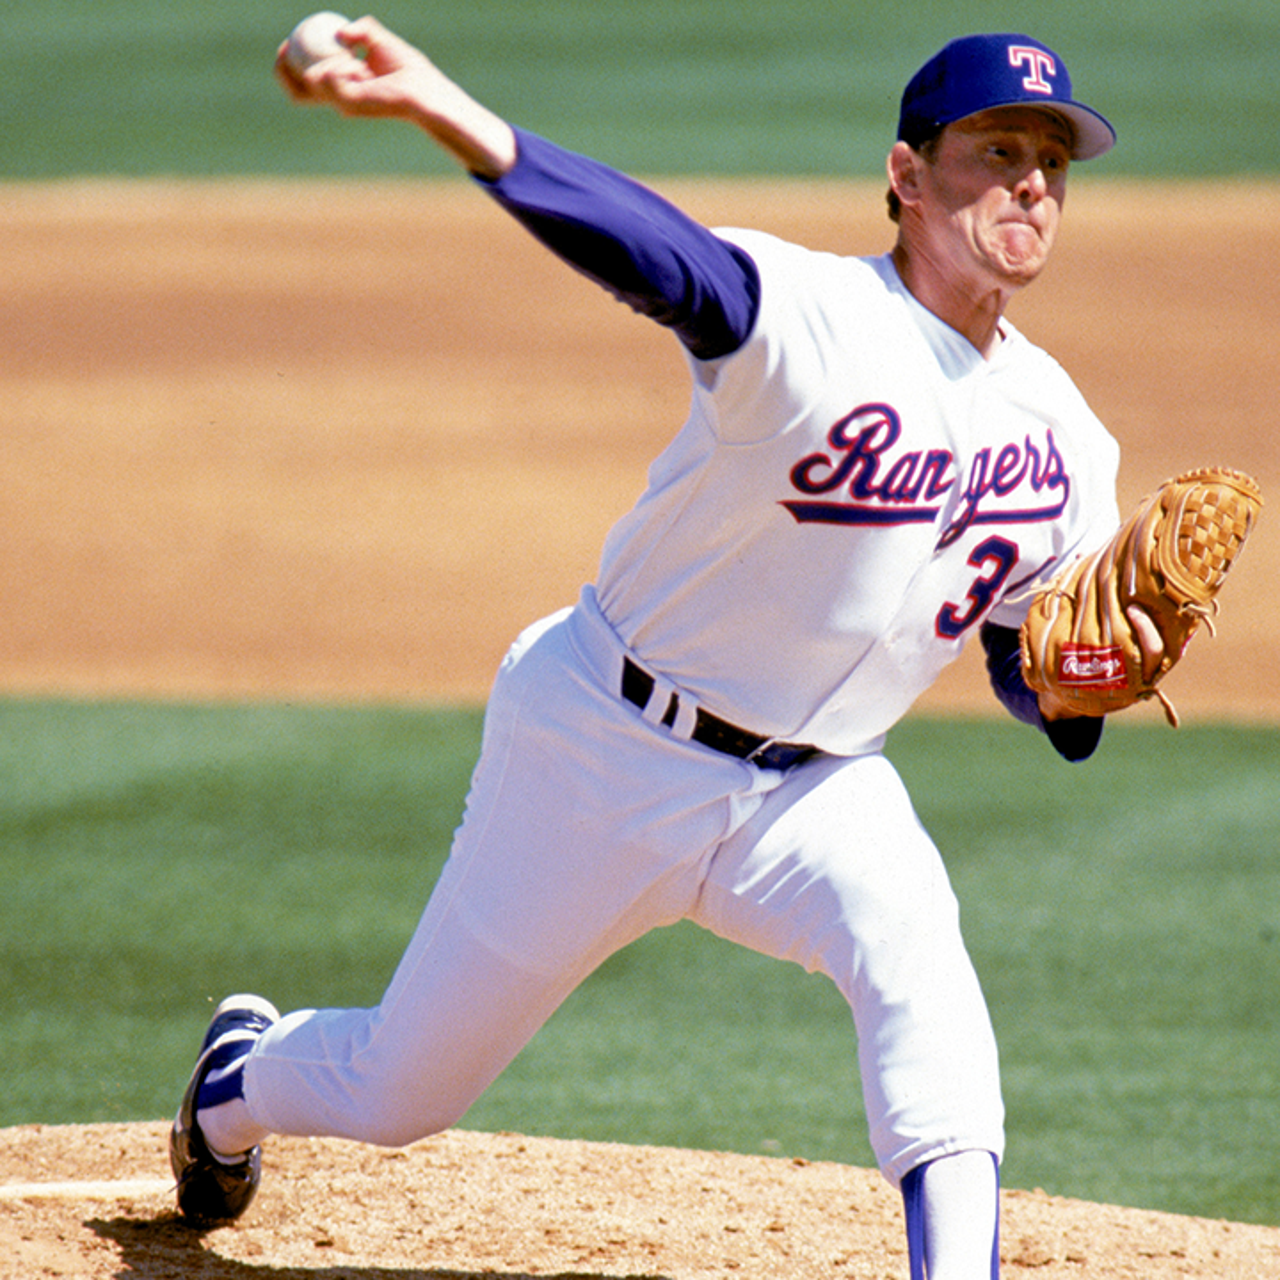 Nolan Ryan of the Houston Astros pitches against the Pittsburgh